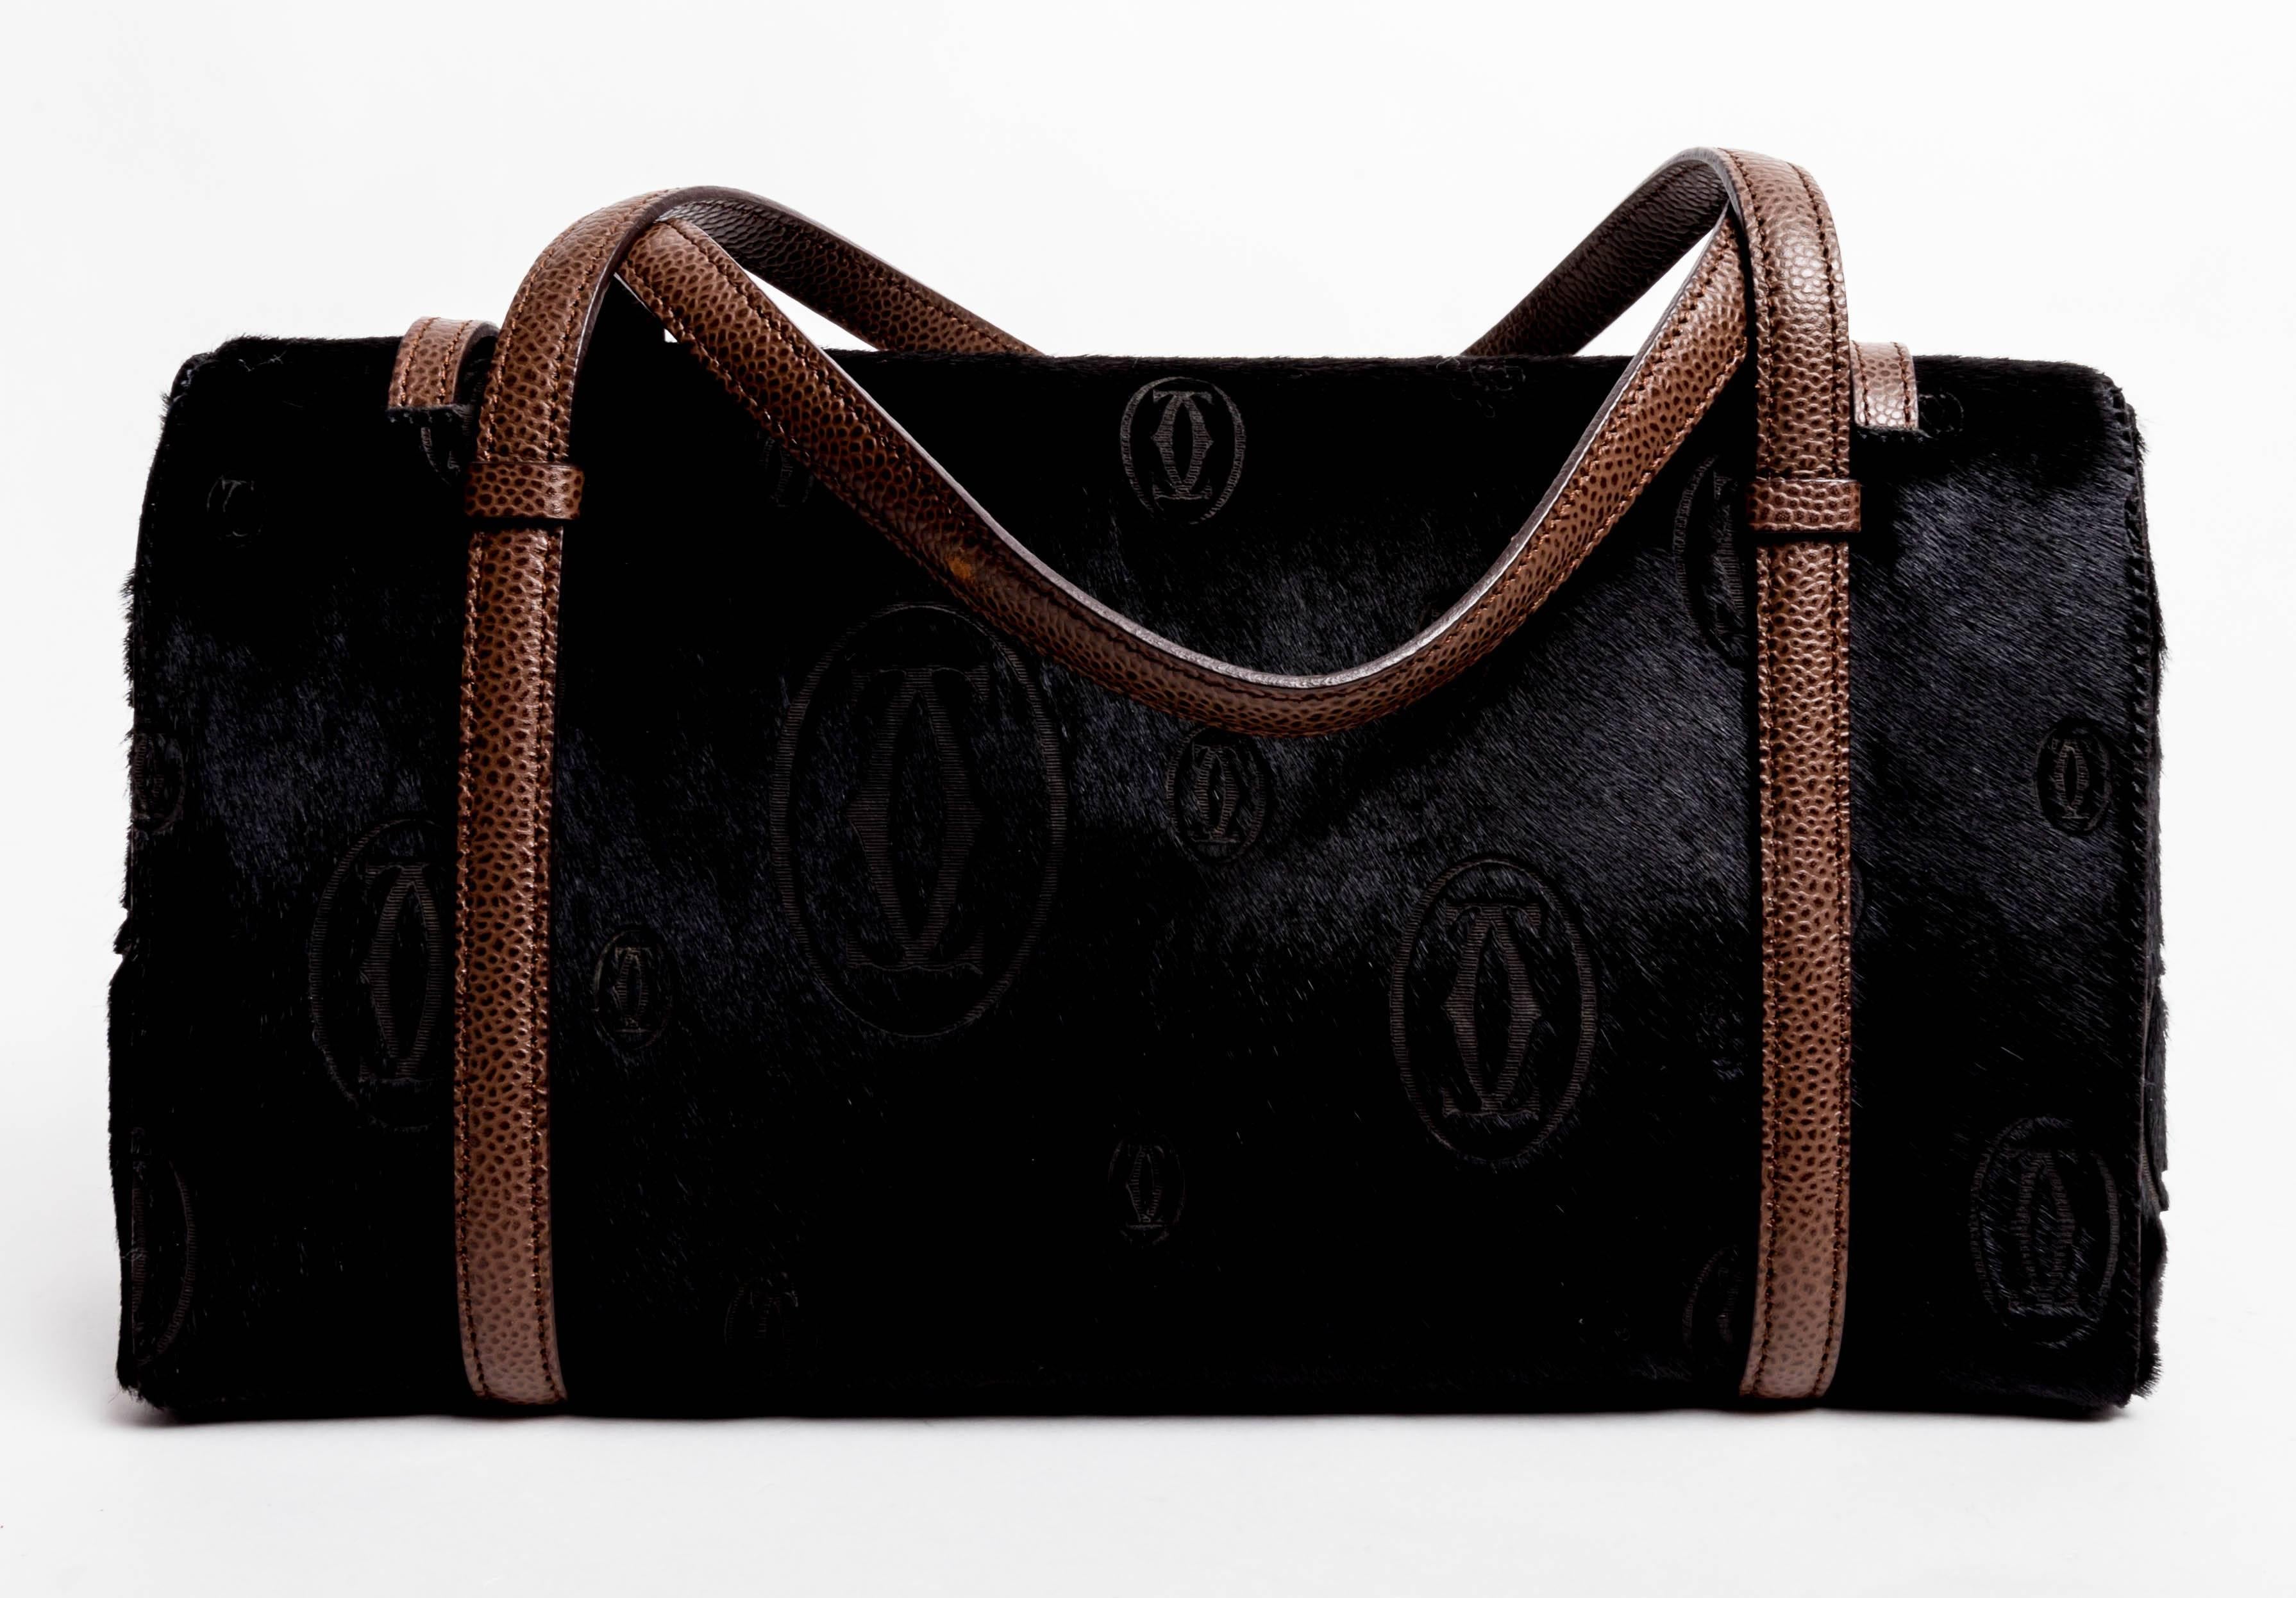 Black Ponyskin Cartier Bag with Brown Leather Handles 3